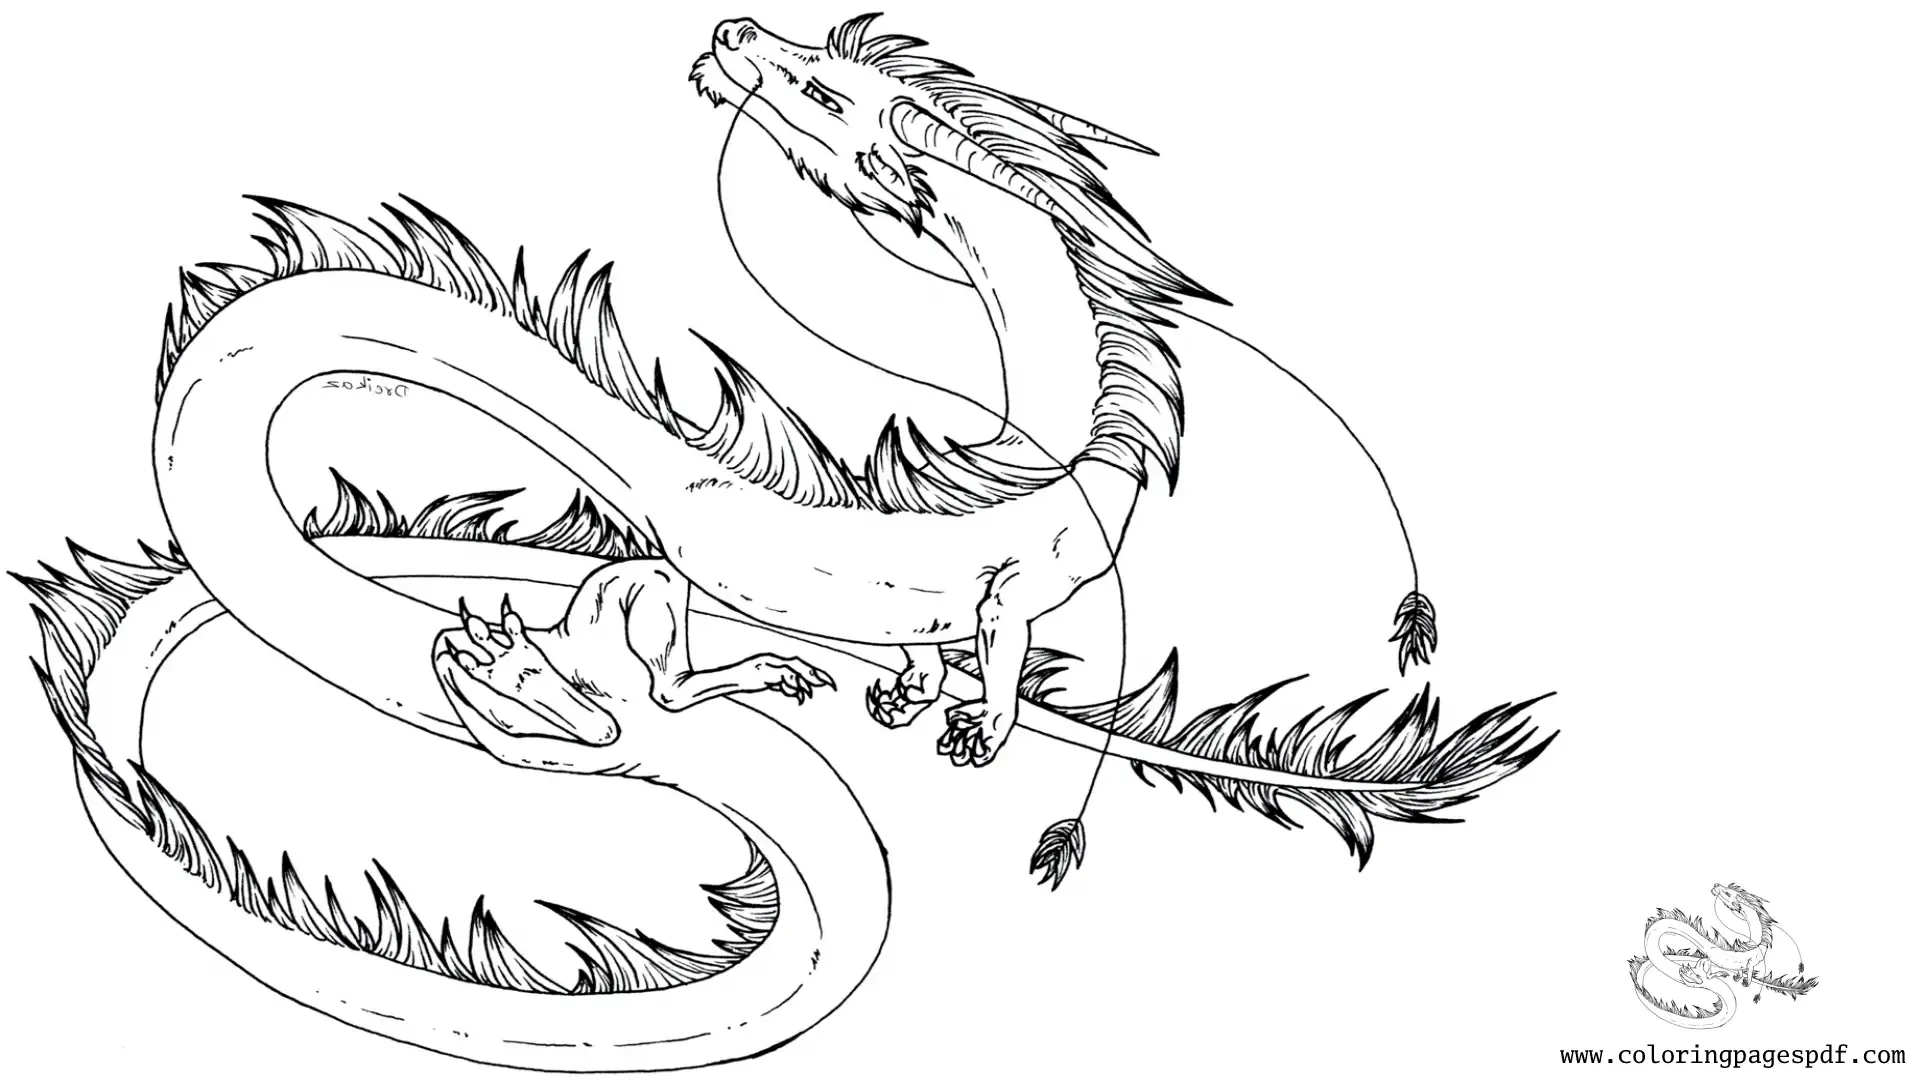 Coloring Page Of A Really Long Dragon